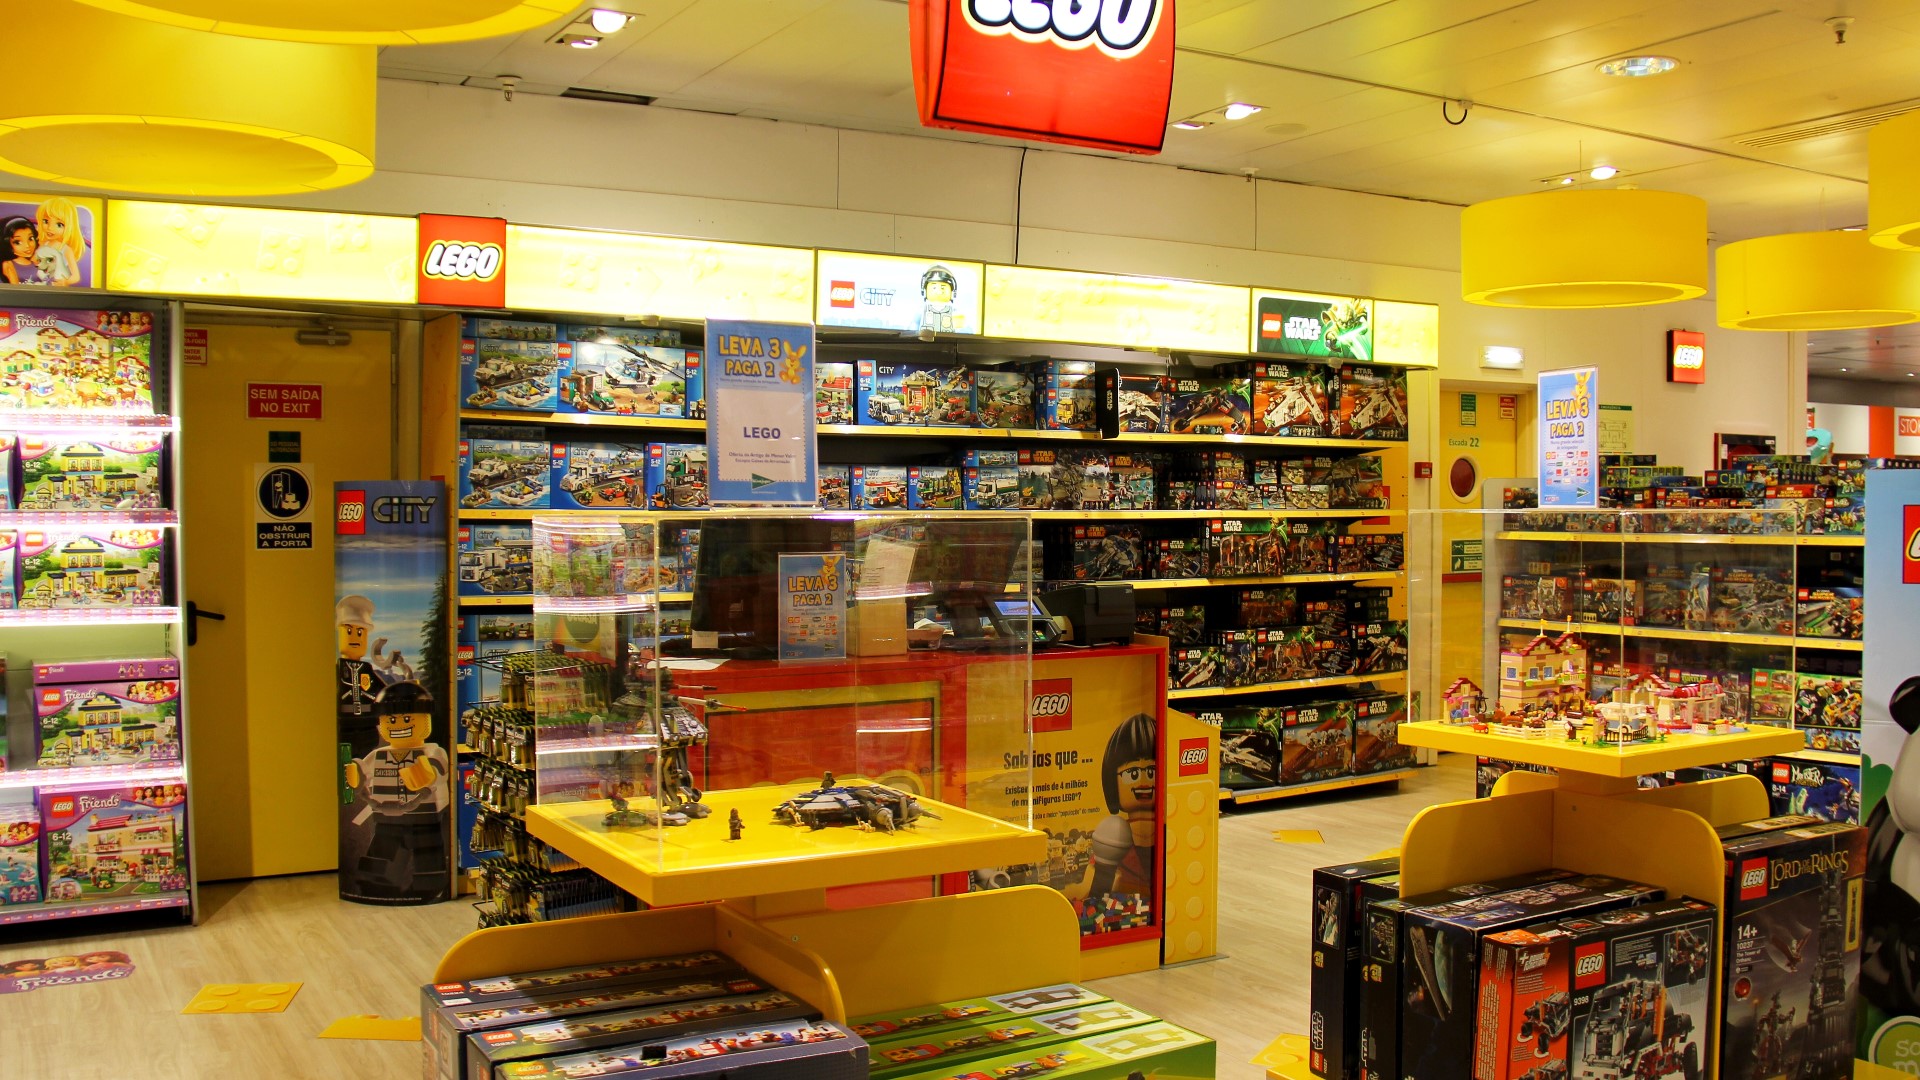 A physical LEGO store allows customers to make personalized mini figurines, stock up on rare or unusual parts from the pick-a-brick wall and much more.